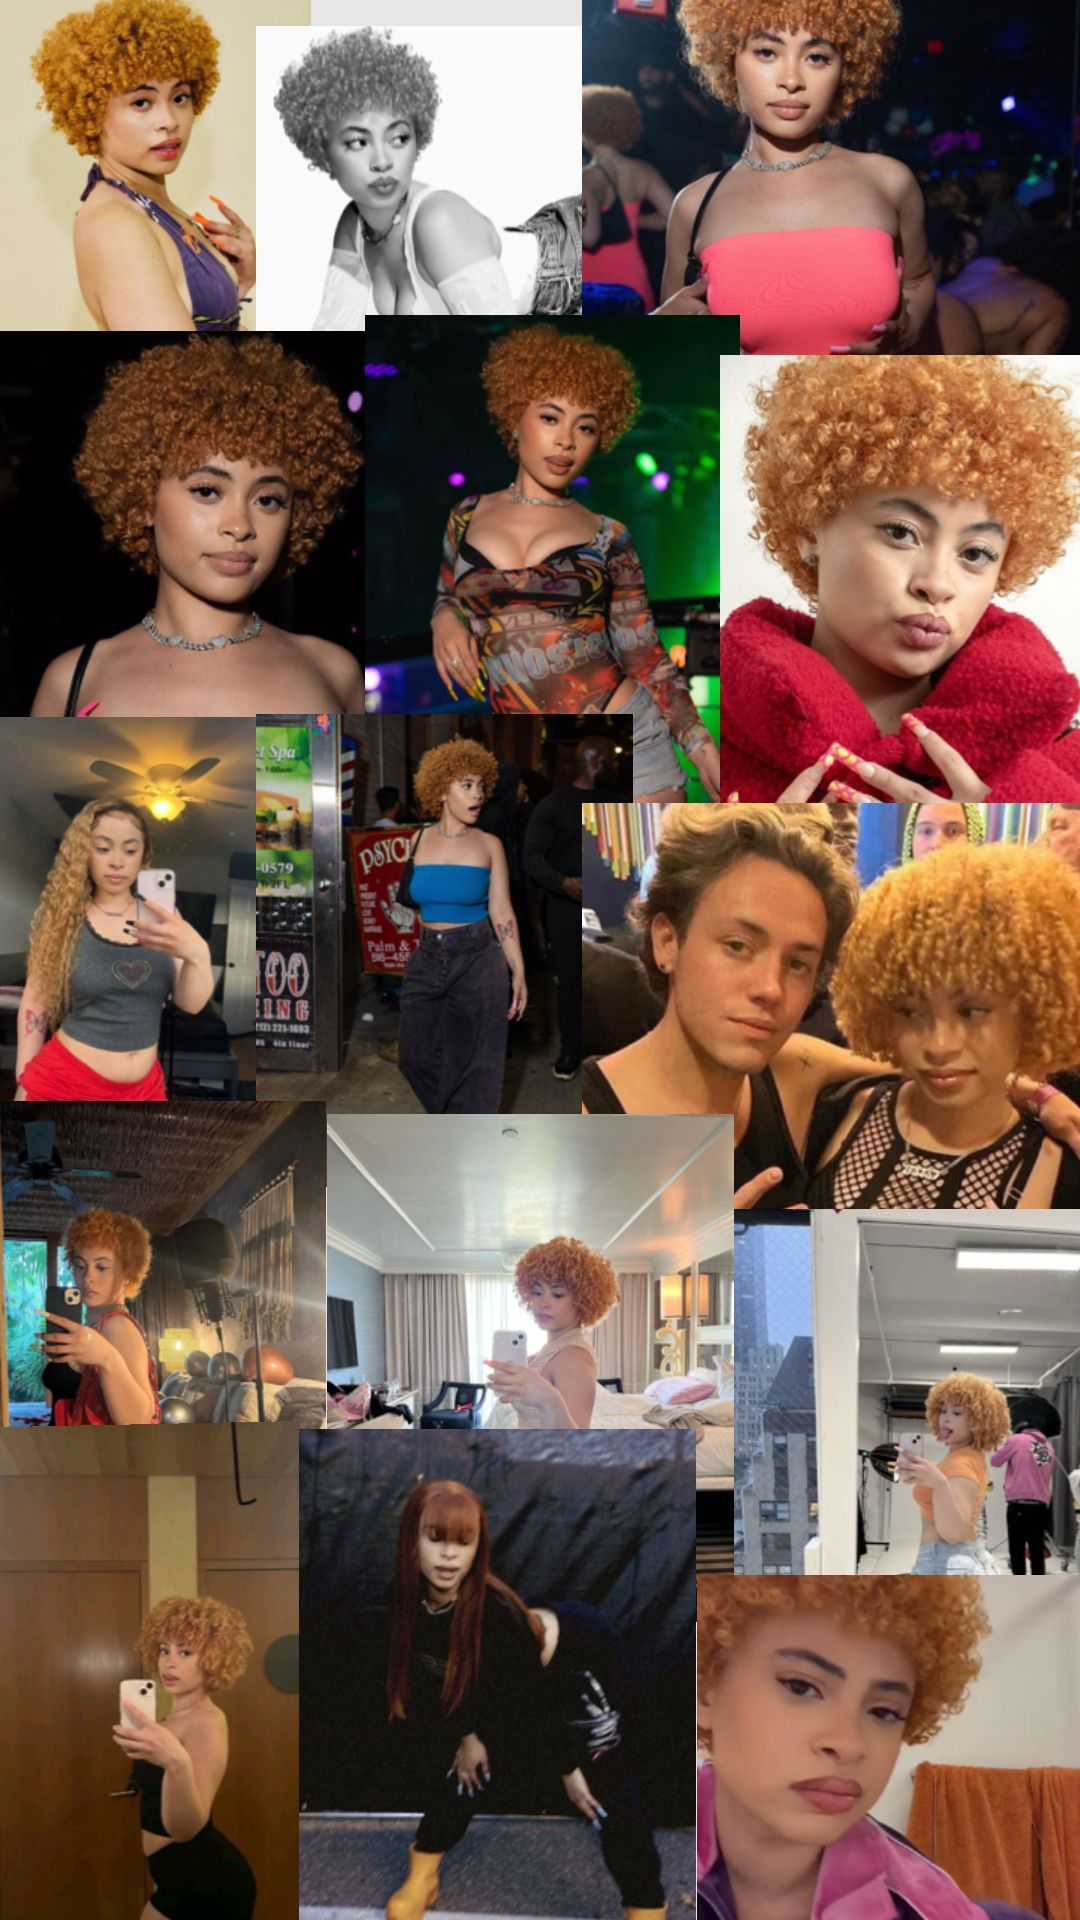 Collage of images of @lelepaulina with different hair styles and colors. #lelepaulina #hair #hairstyle #color #collage - Ice Spice